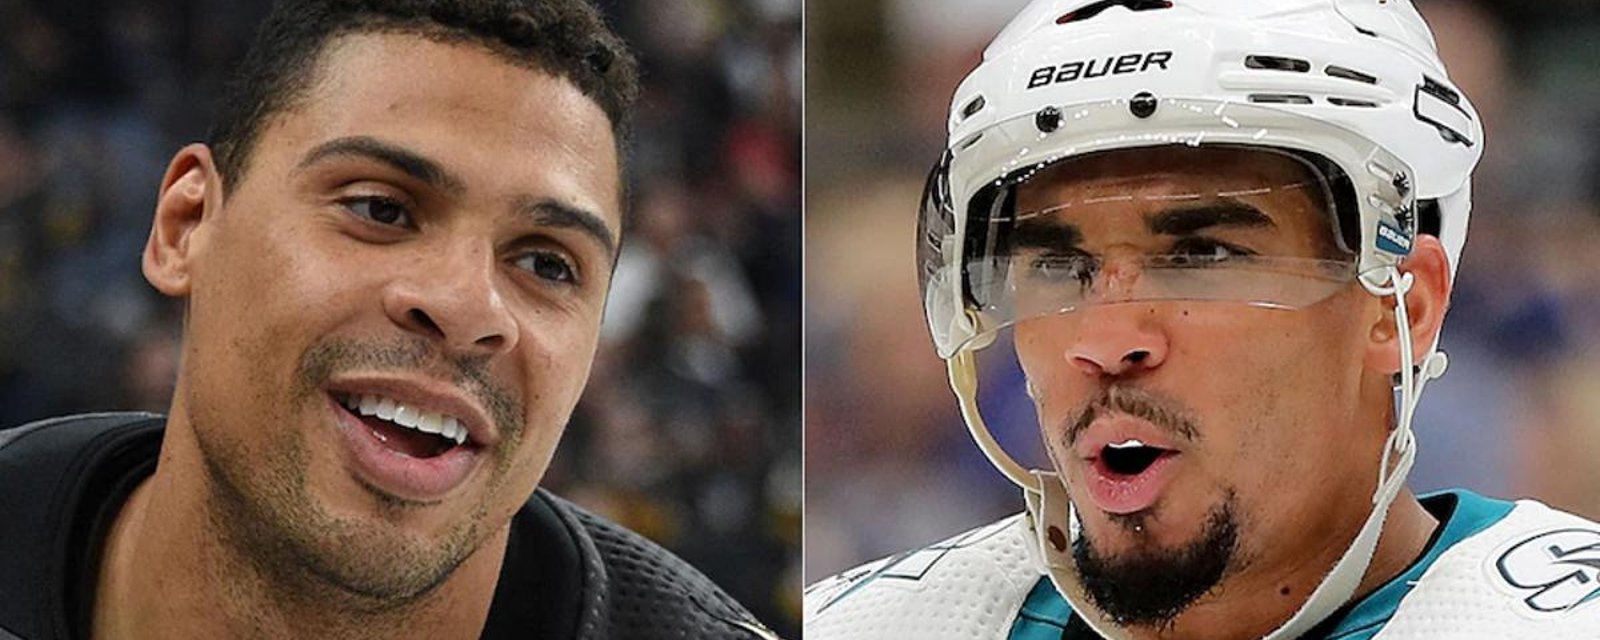 Ryan Reaves and Evander Kane renew their rivalry 10 minutes into the game.